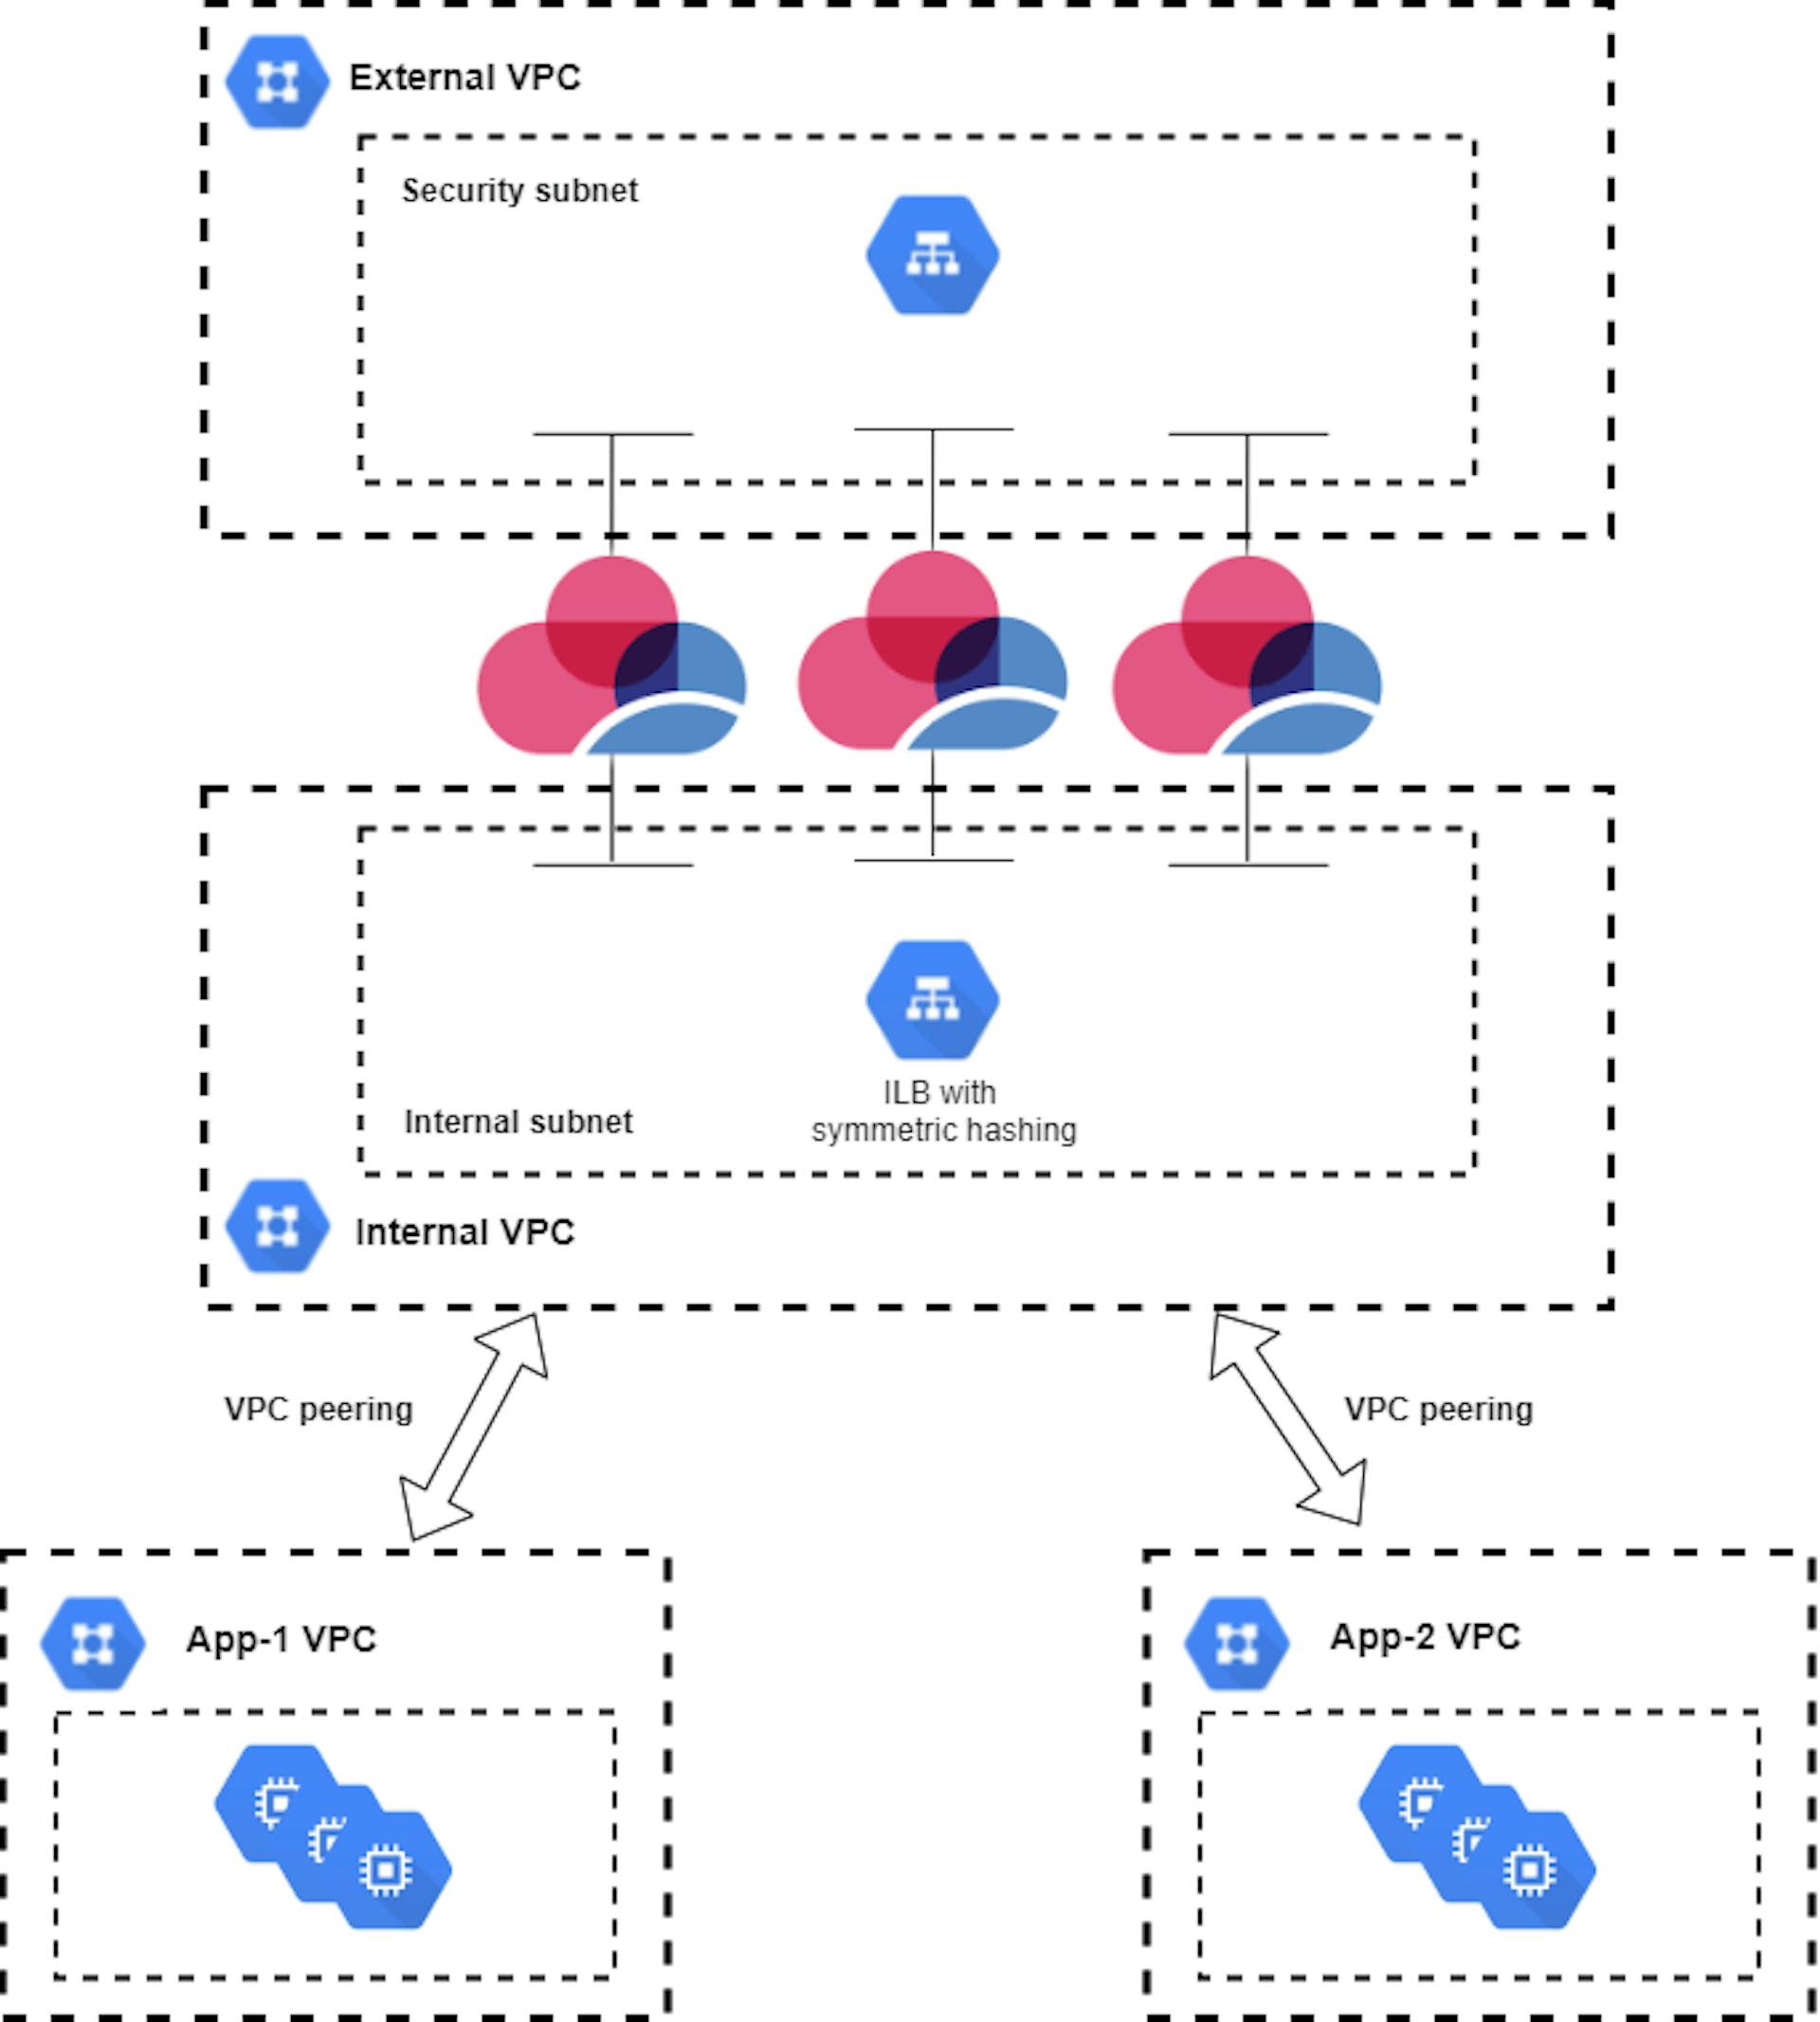 East-West traffic inspection using CloudGuard Network Security gateways in Google Cloud